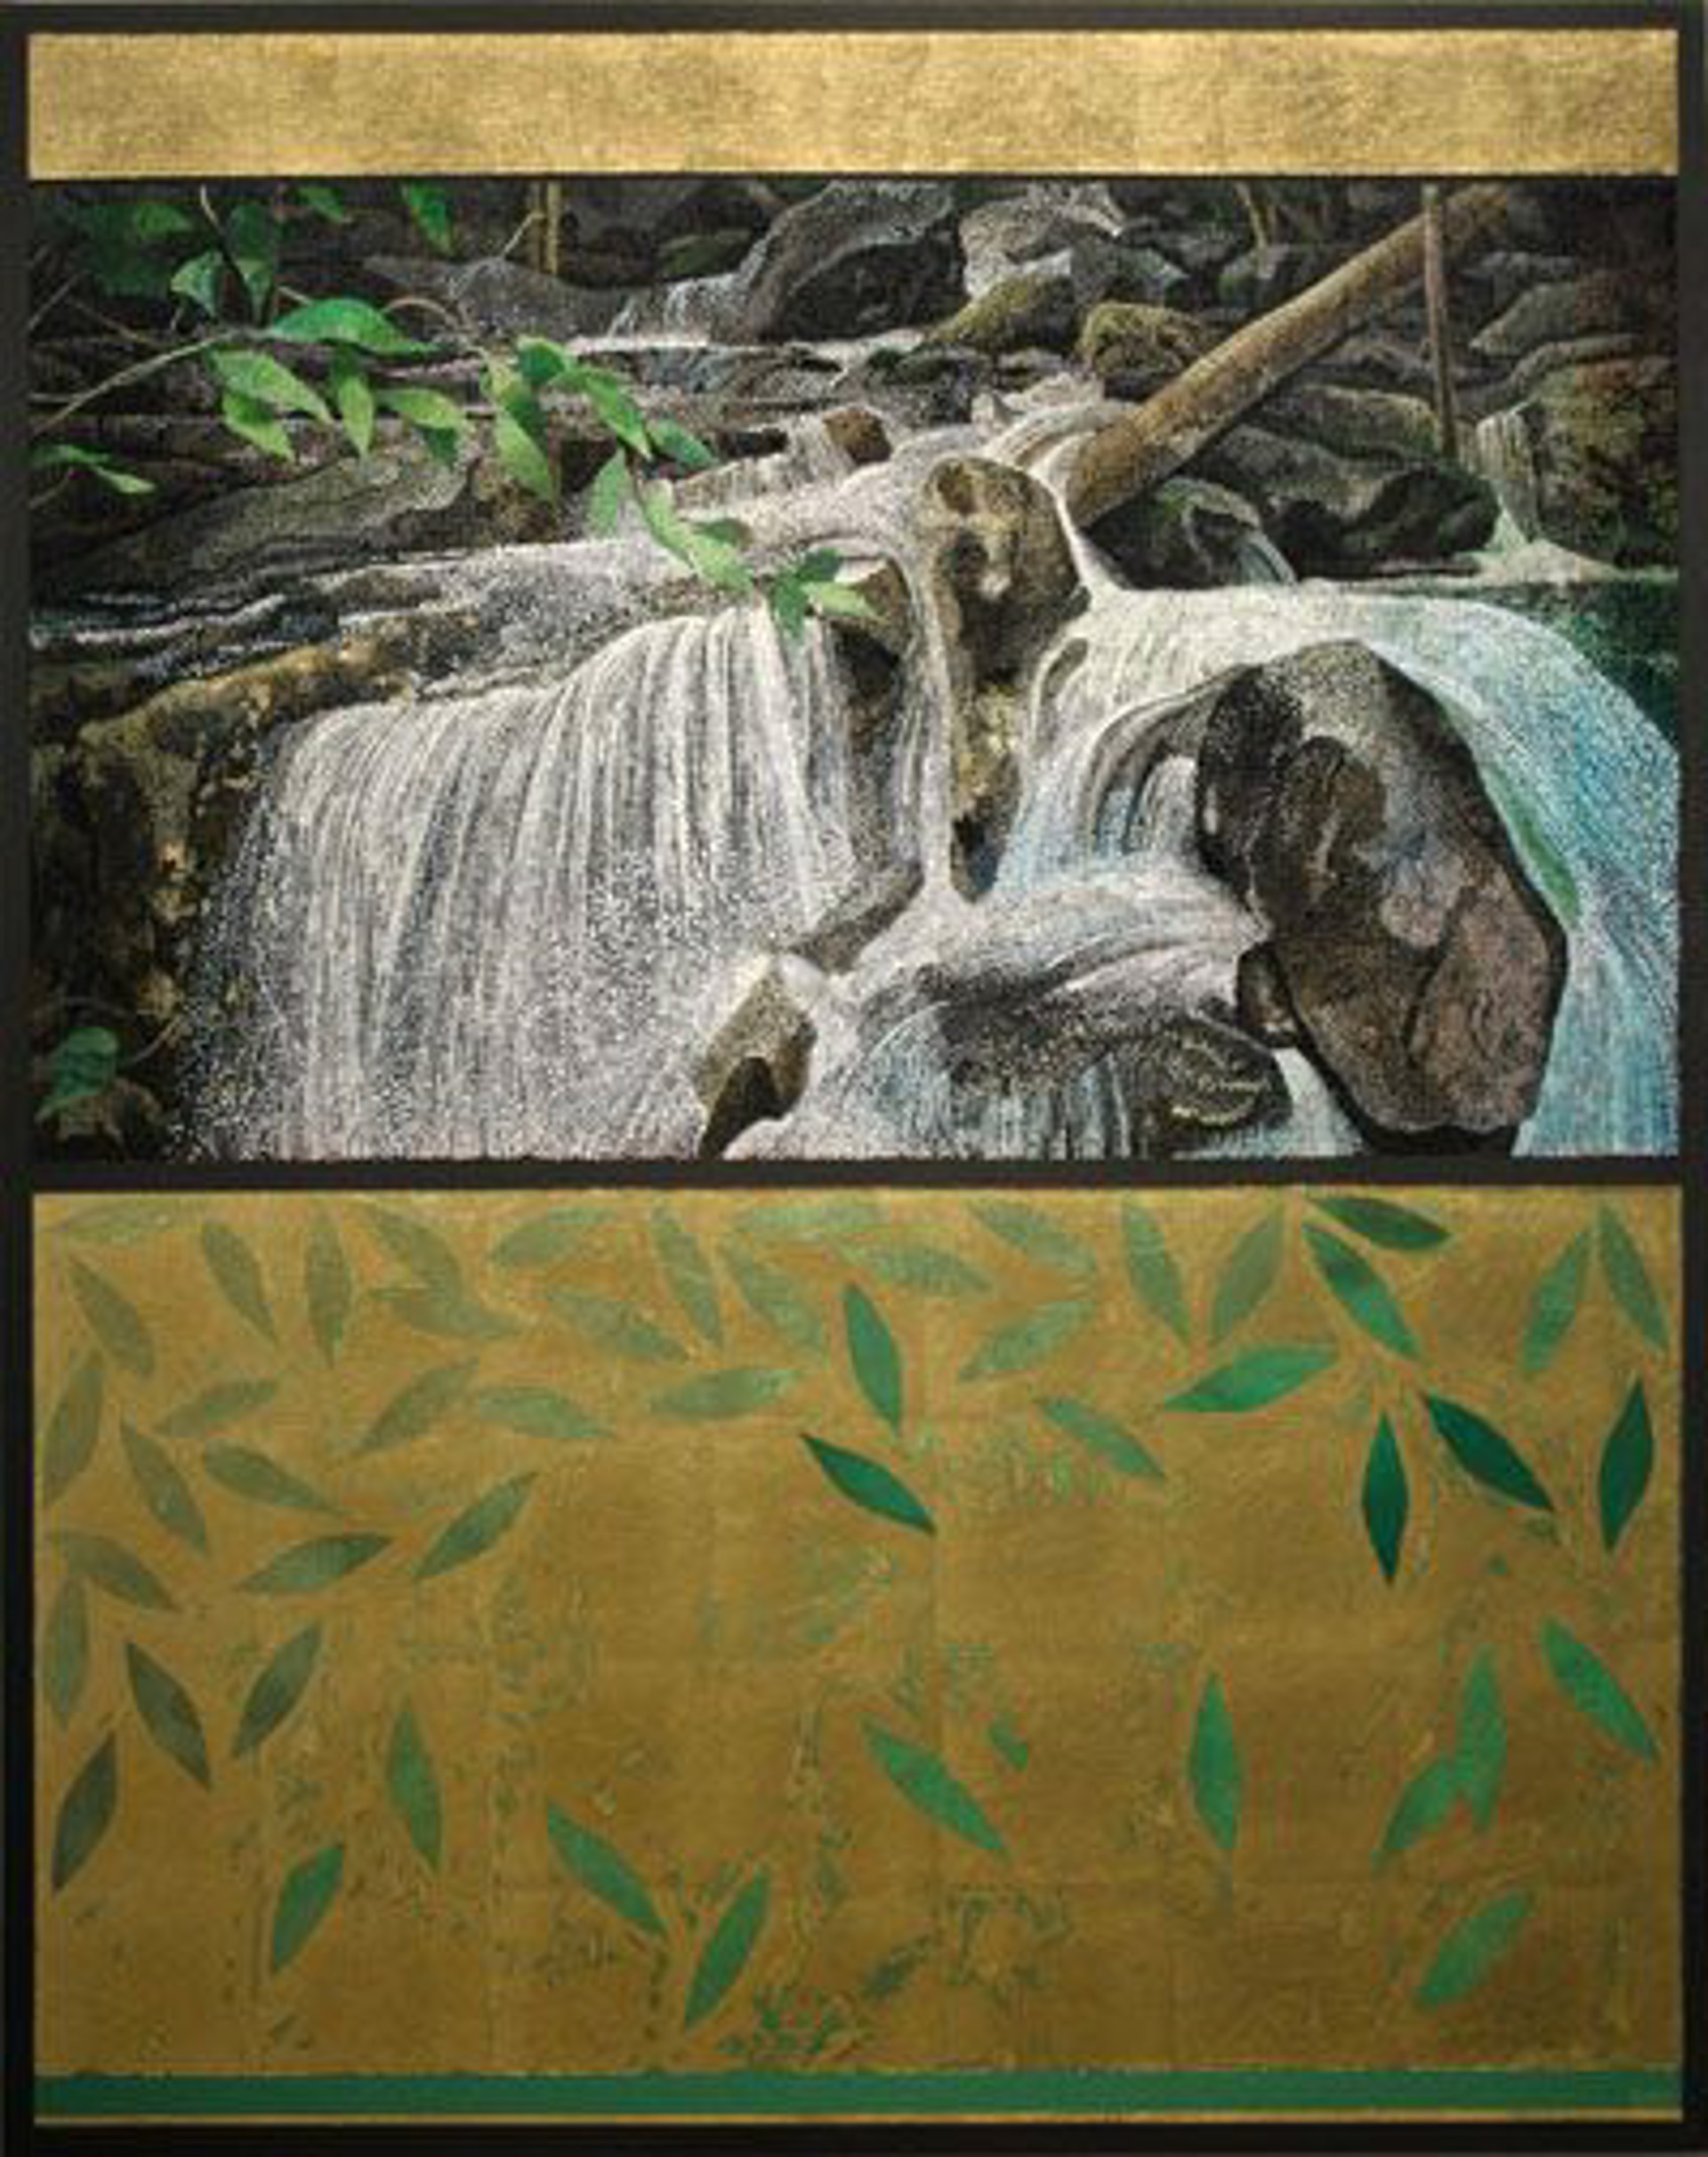 Leaves with Waterfall by Miles Bair